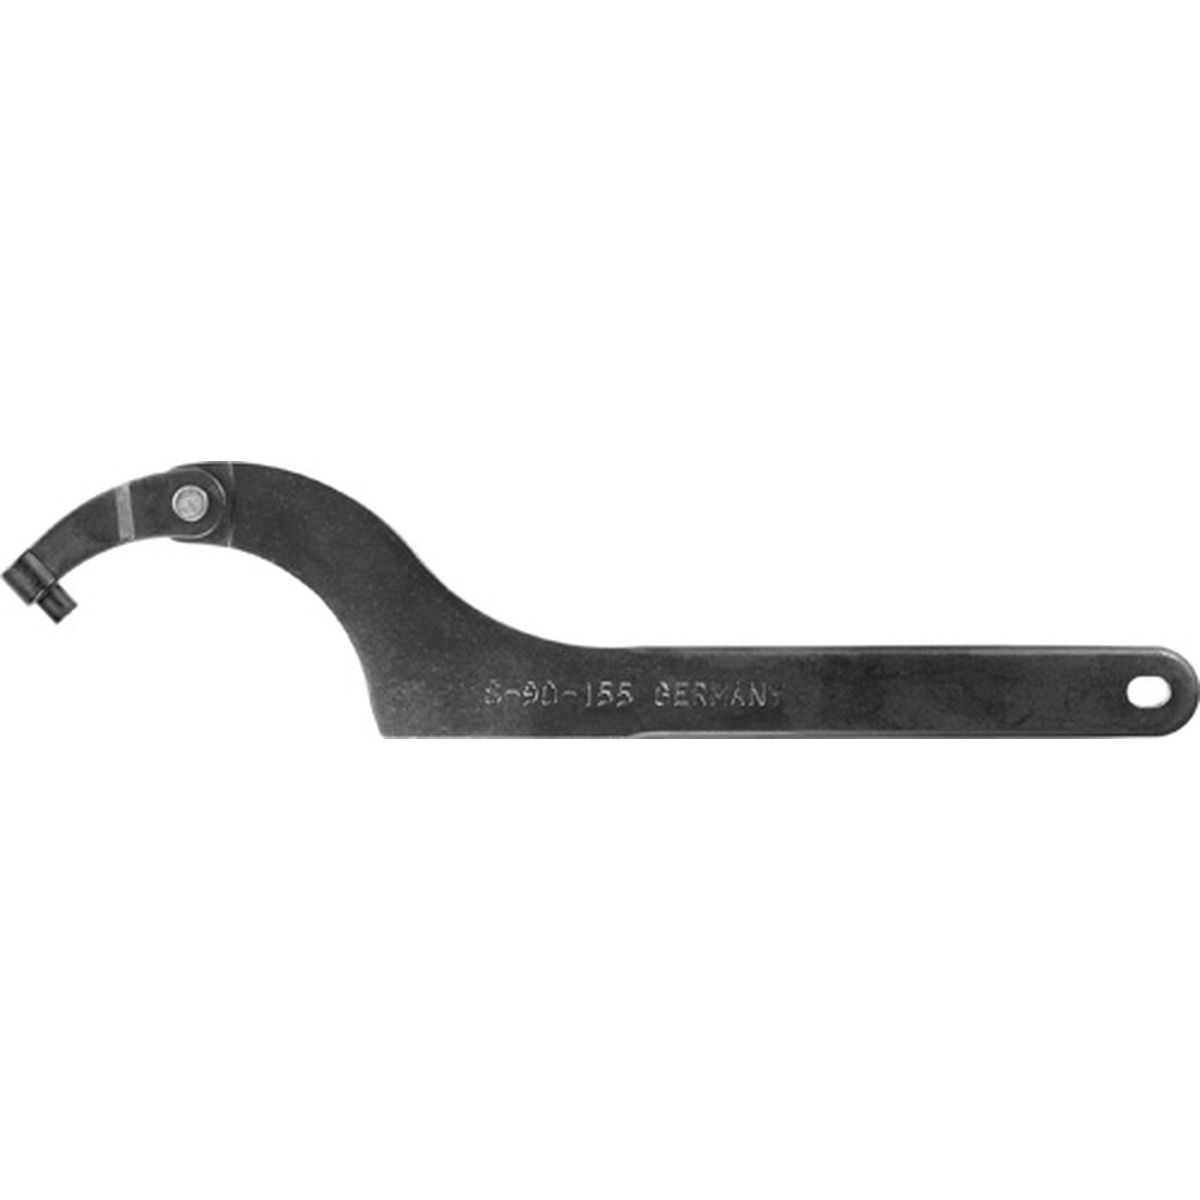 776SC 90-155x8 Hinged hook wrench wi th pin AMF